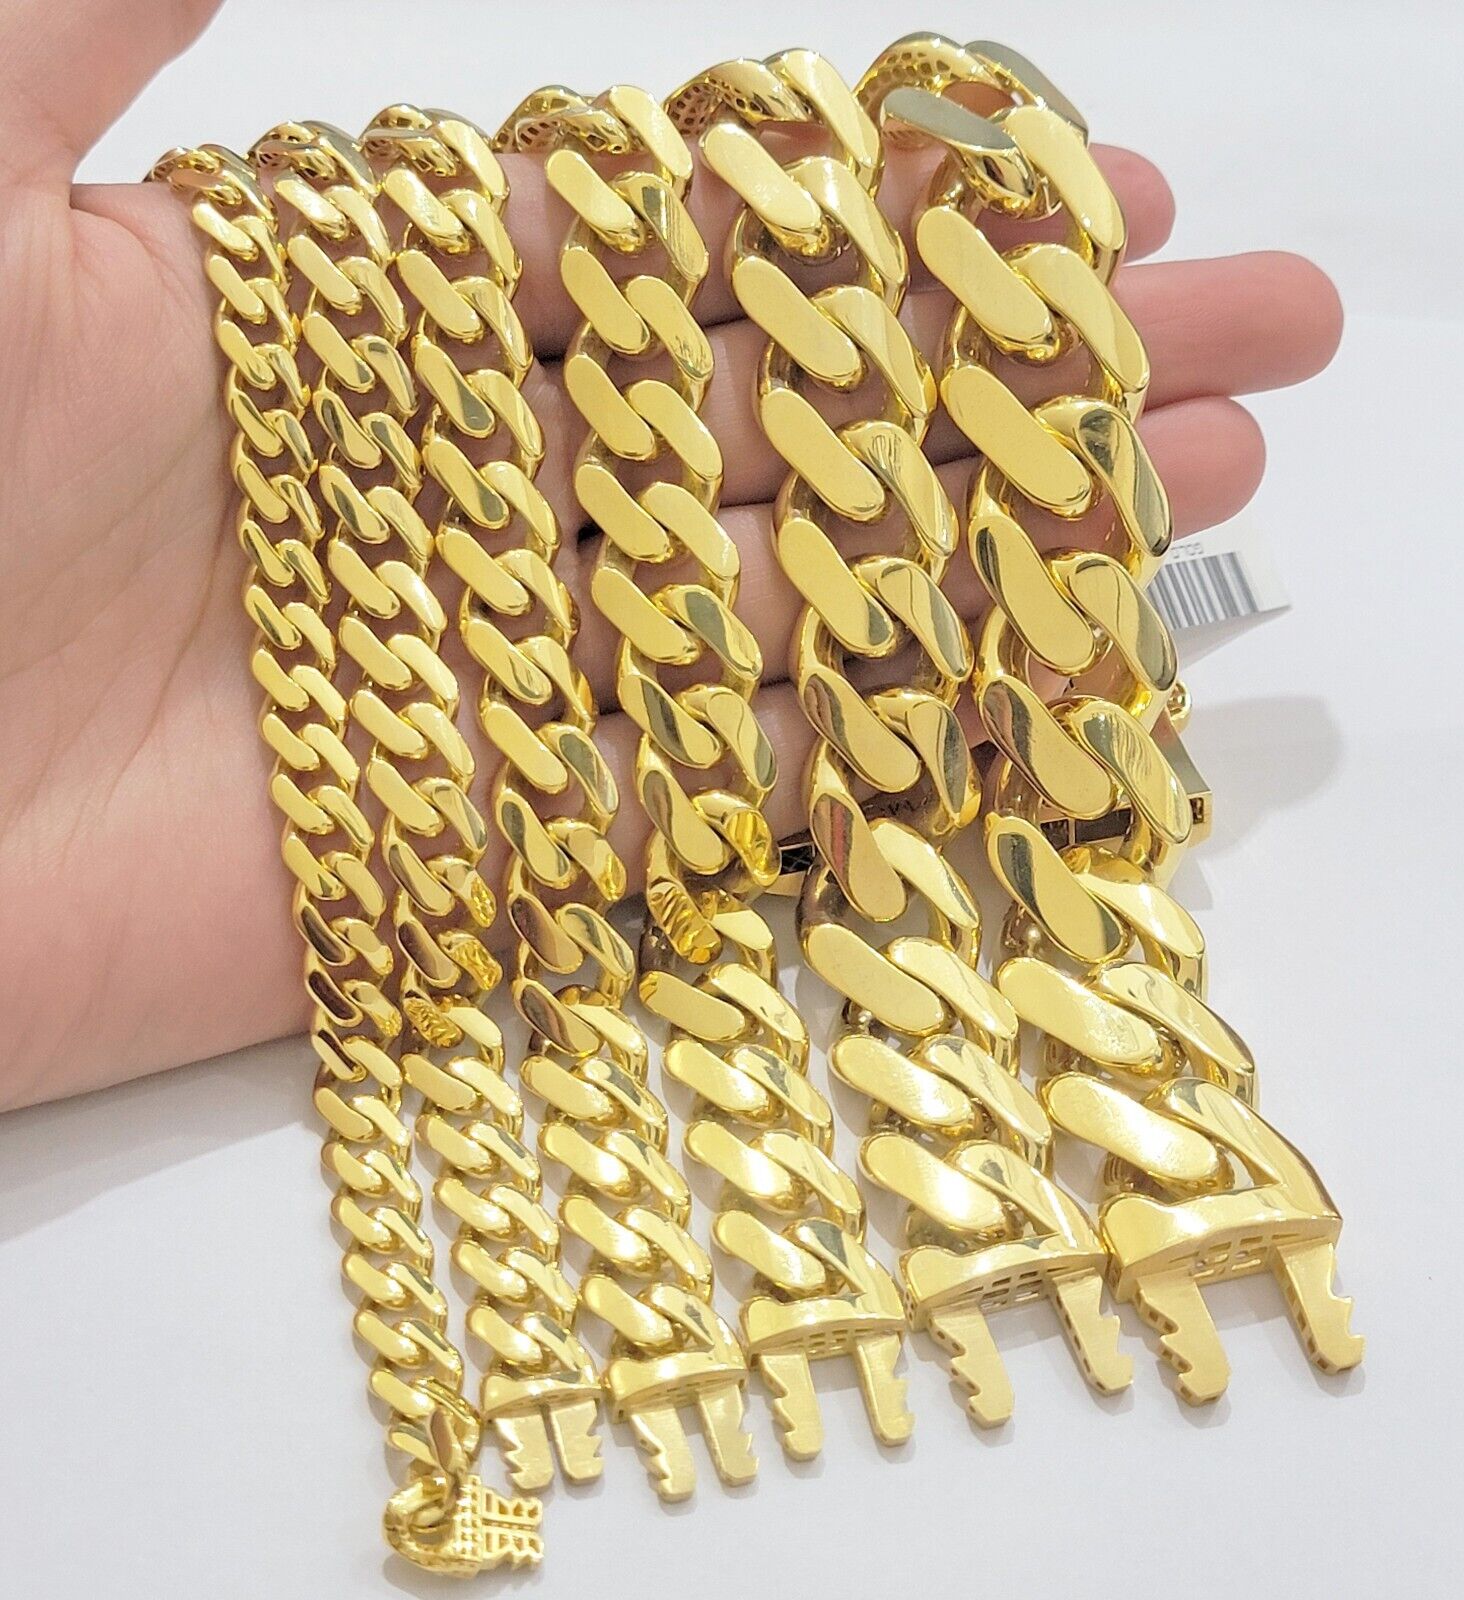 Real 10K Yellow Gold Chain Bracelet 5mm-10mm Miami Cuban Link Necklace 8-30 10 mm / 8 inch ( Bracelet)